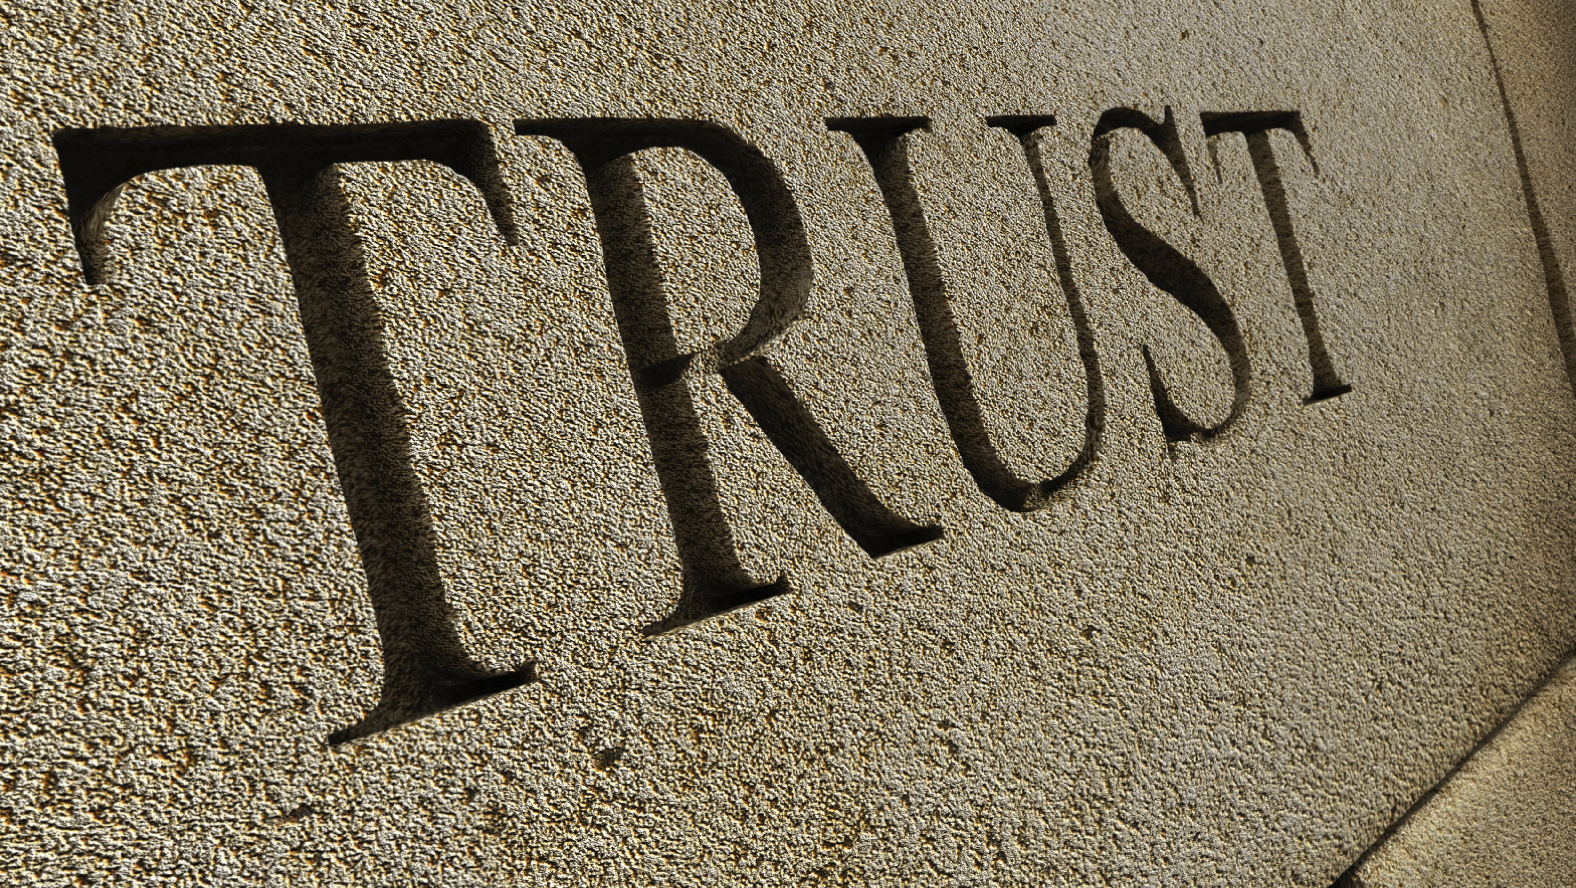 THE SCIENCE OF TRUST & THE IMPLICATIONS FOR PRACTICE